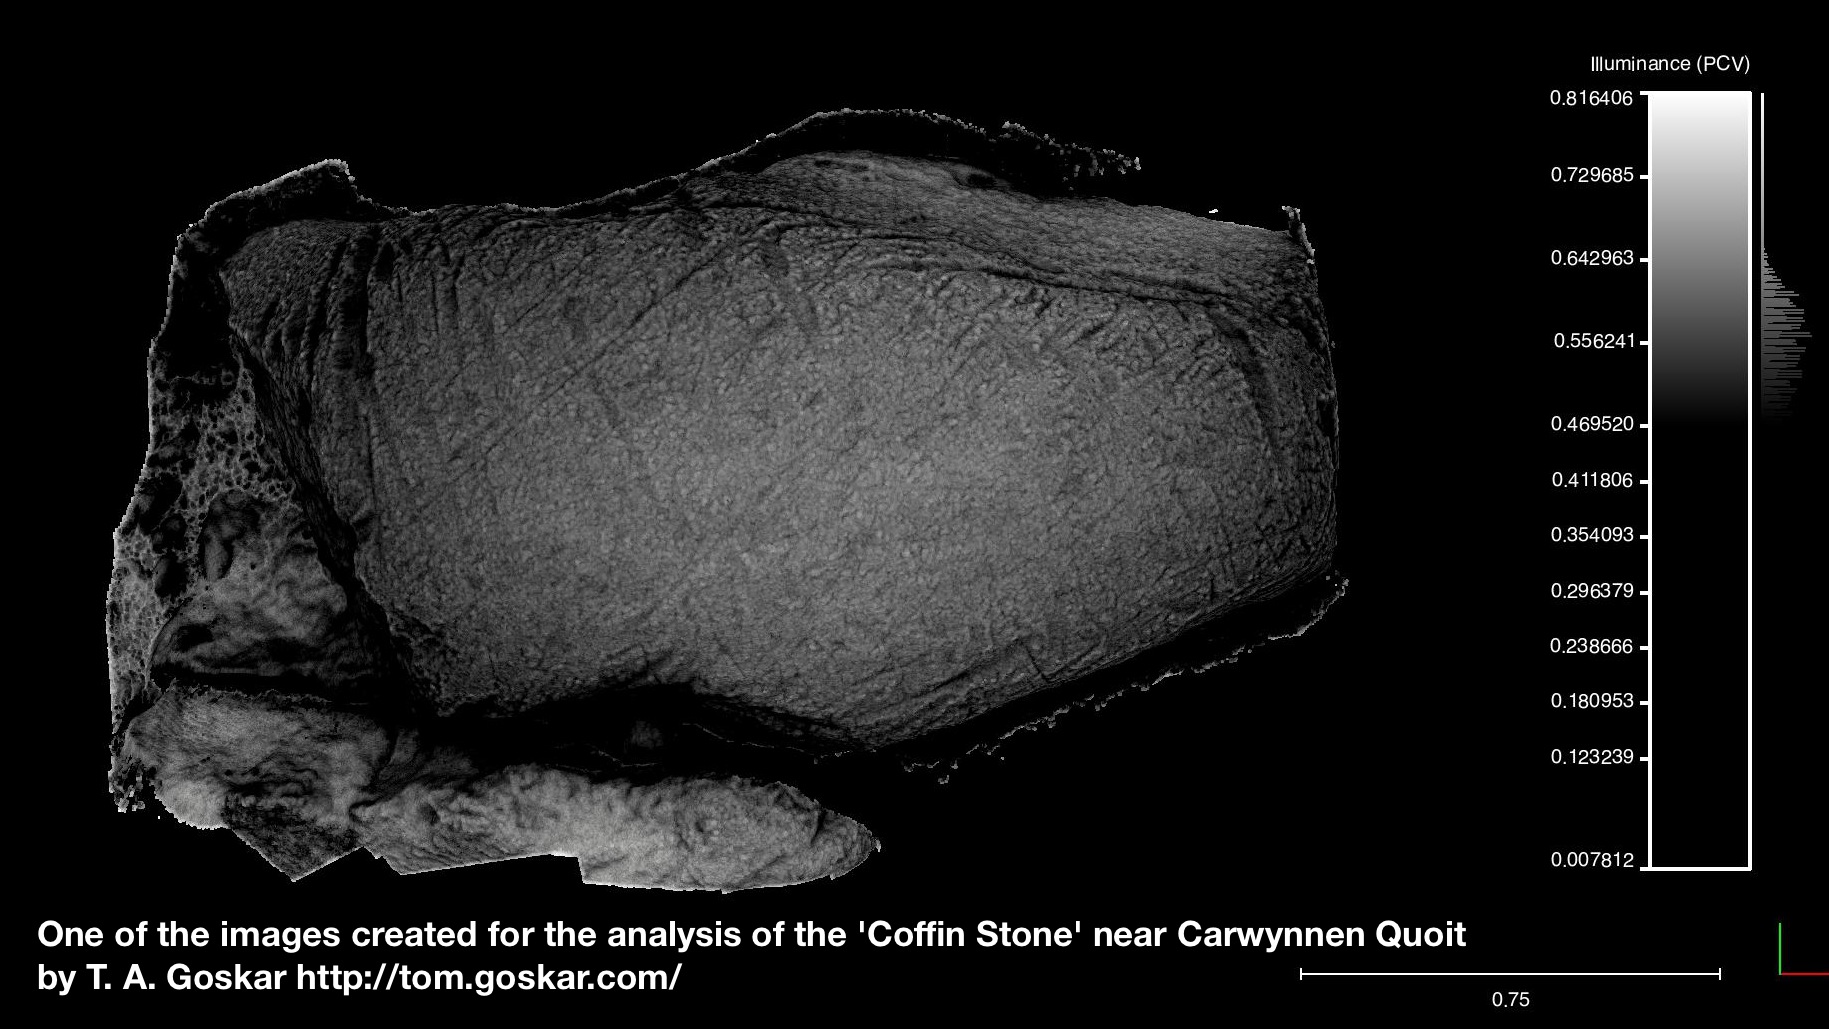 One of the images created for the analysis of the 'Coffin Stone' close to Carwynnen Quoit